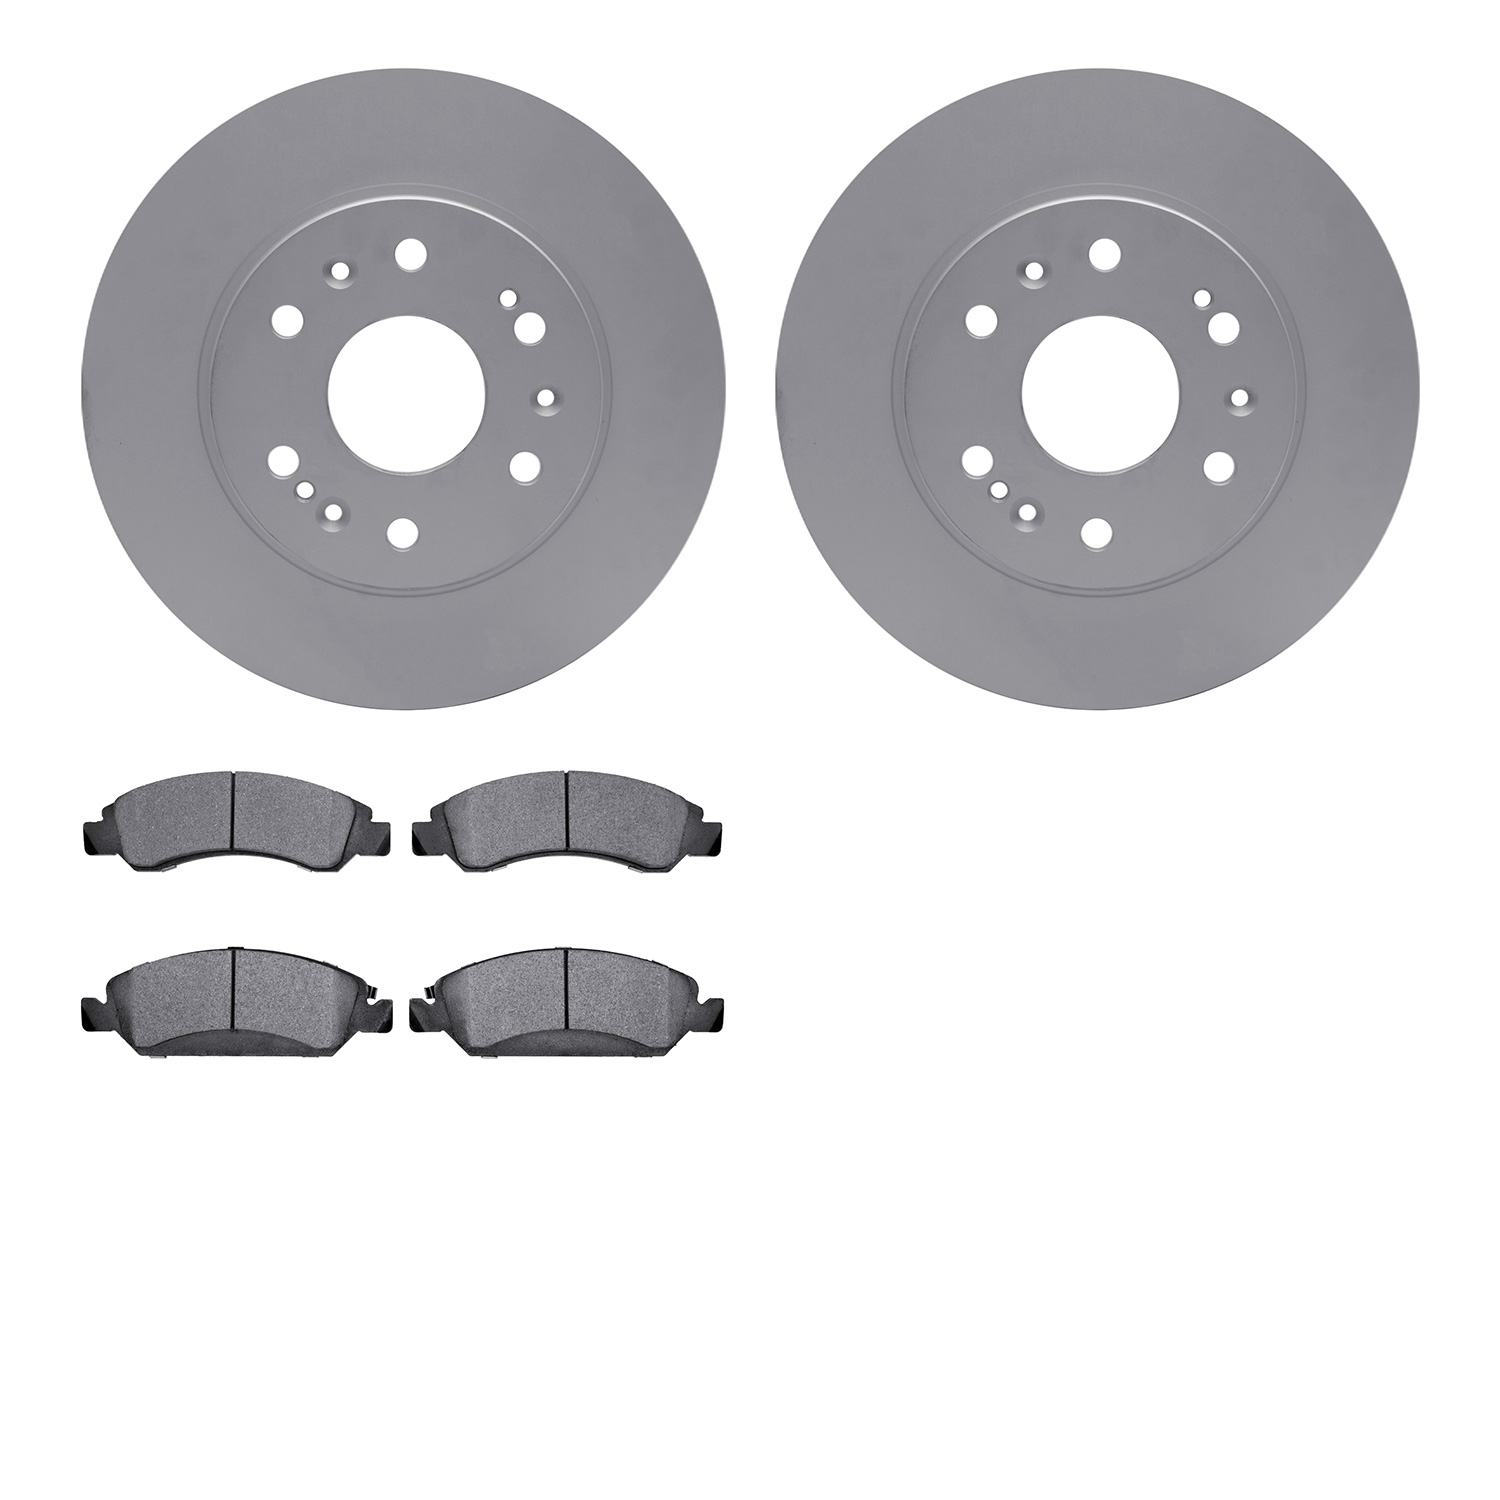 4402-48023 Geospec Brake Rotors with Ultimate-Duty Brake Pads Kit, 2005-2020 GM, Position: Front